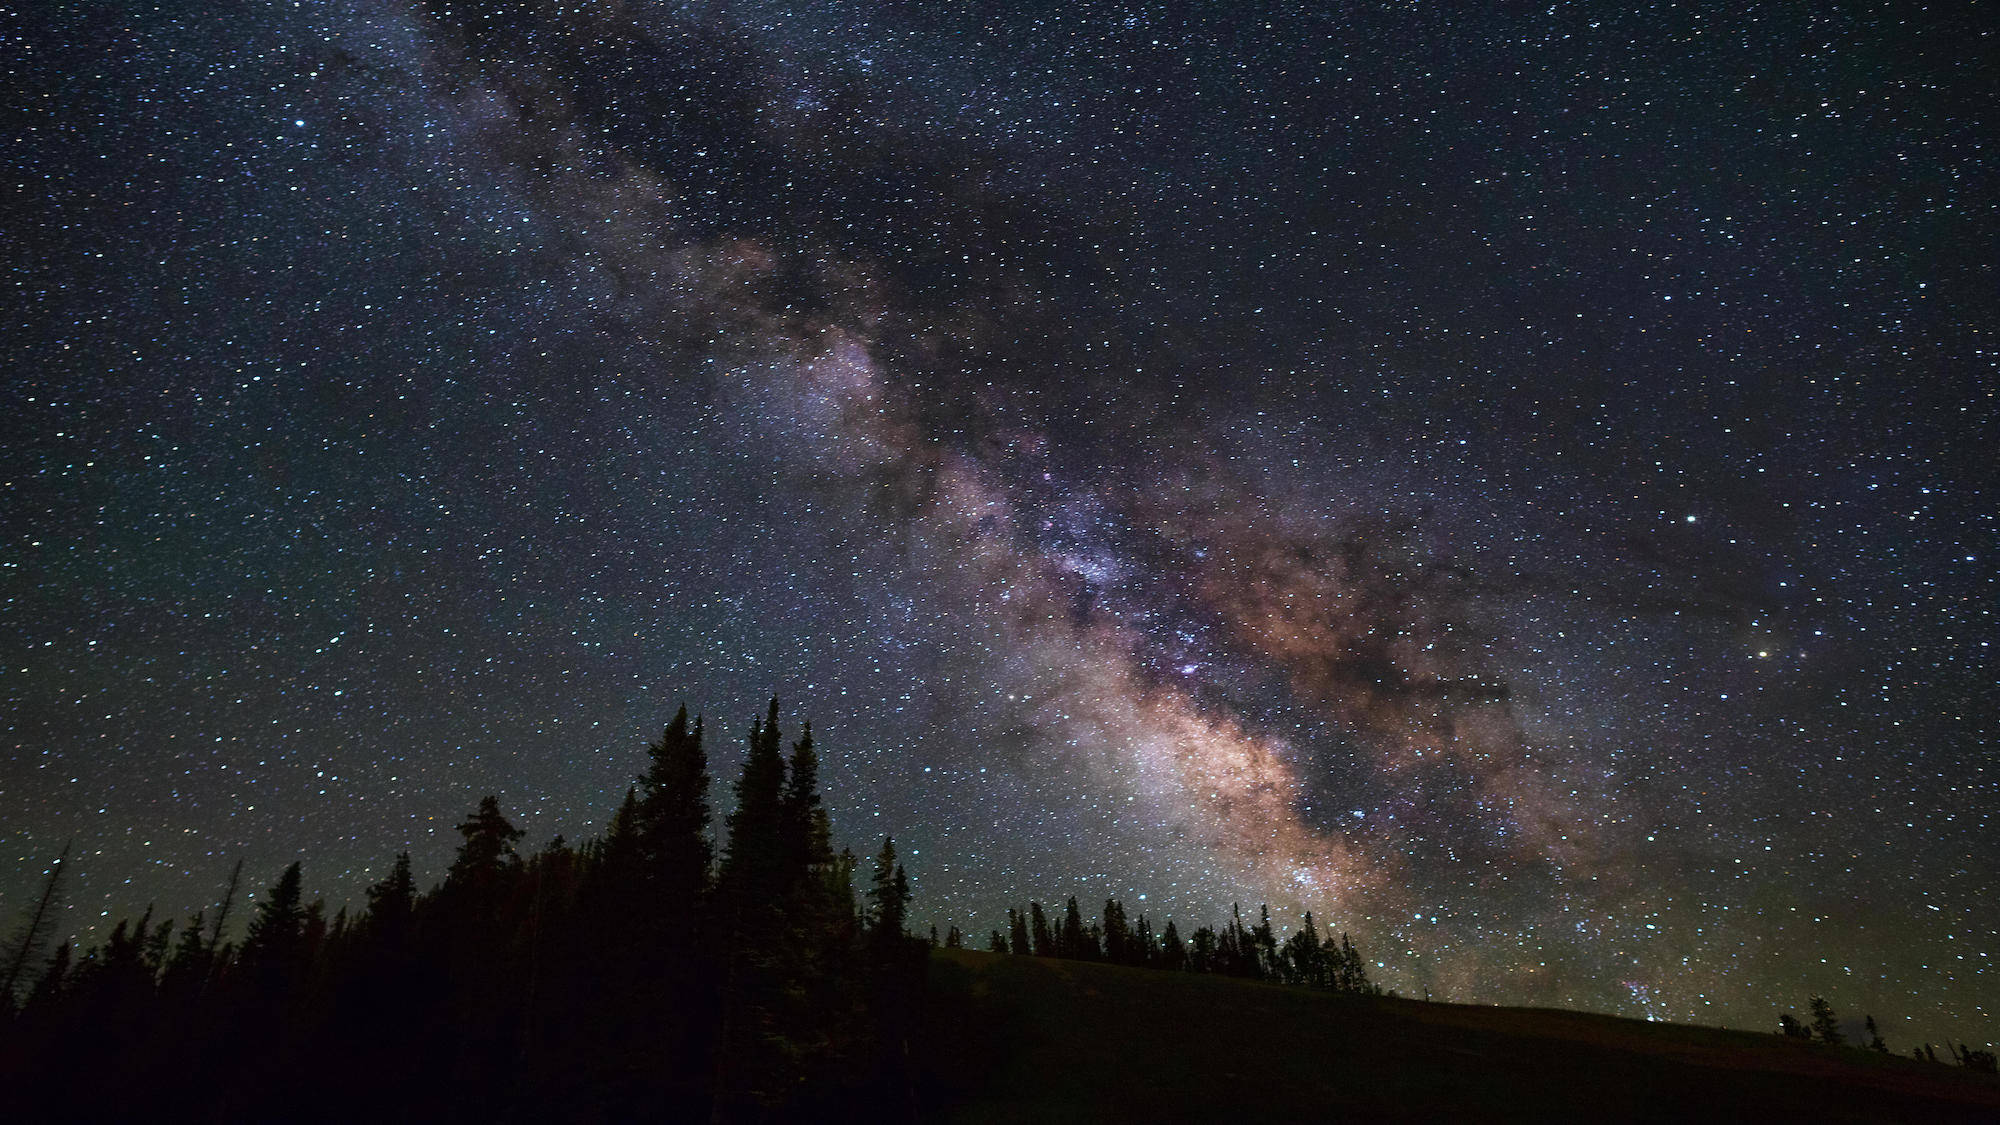 The Milky Way's central region, where Sagittarius and the group of ancient stars can be found, above Telluride, Canada.